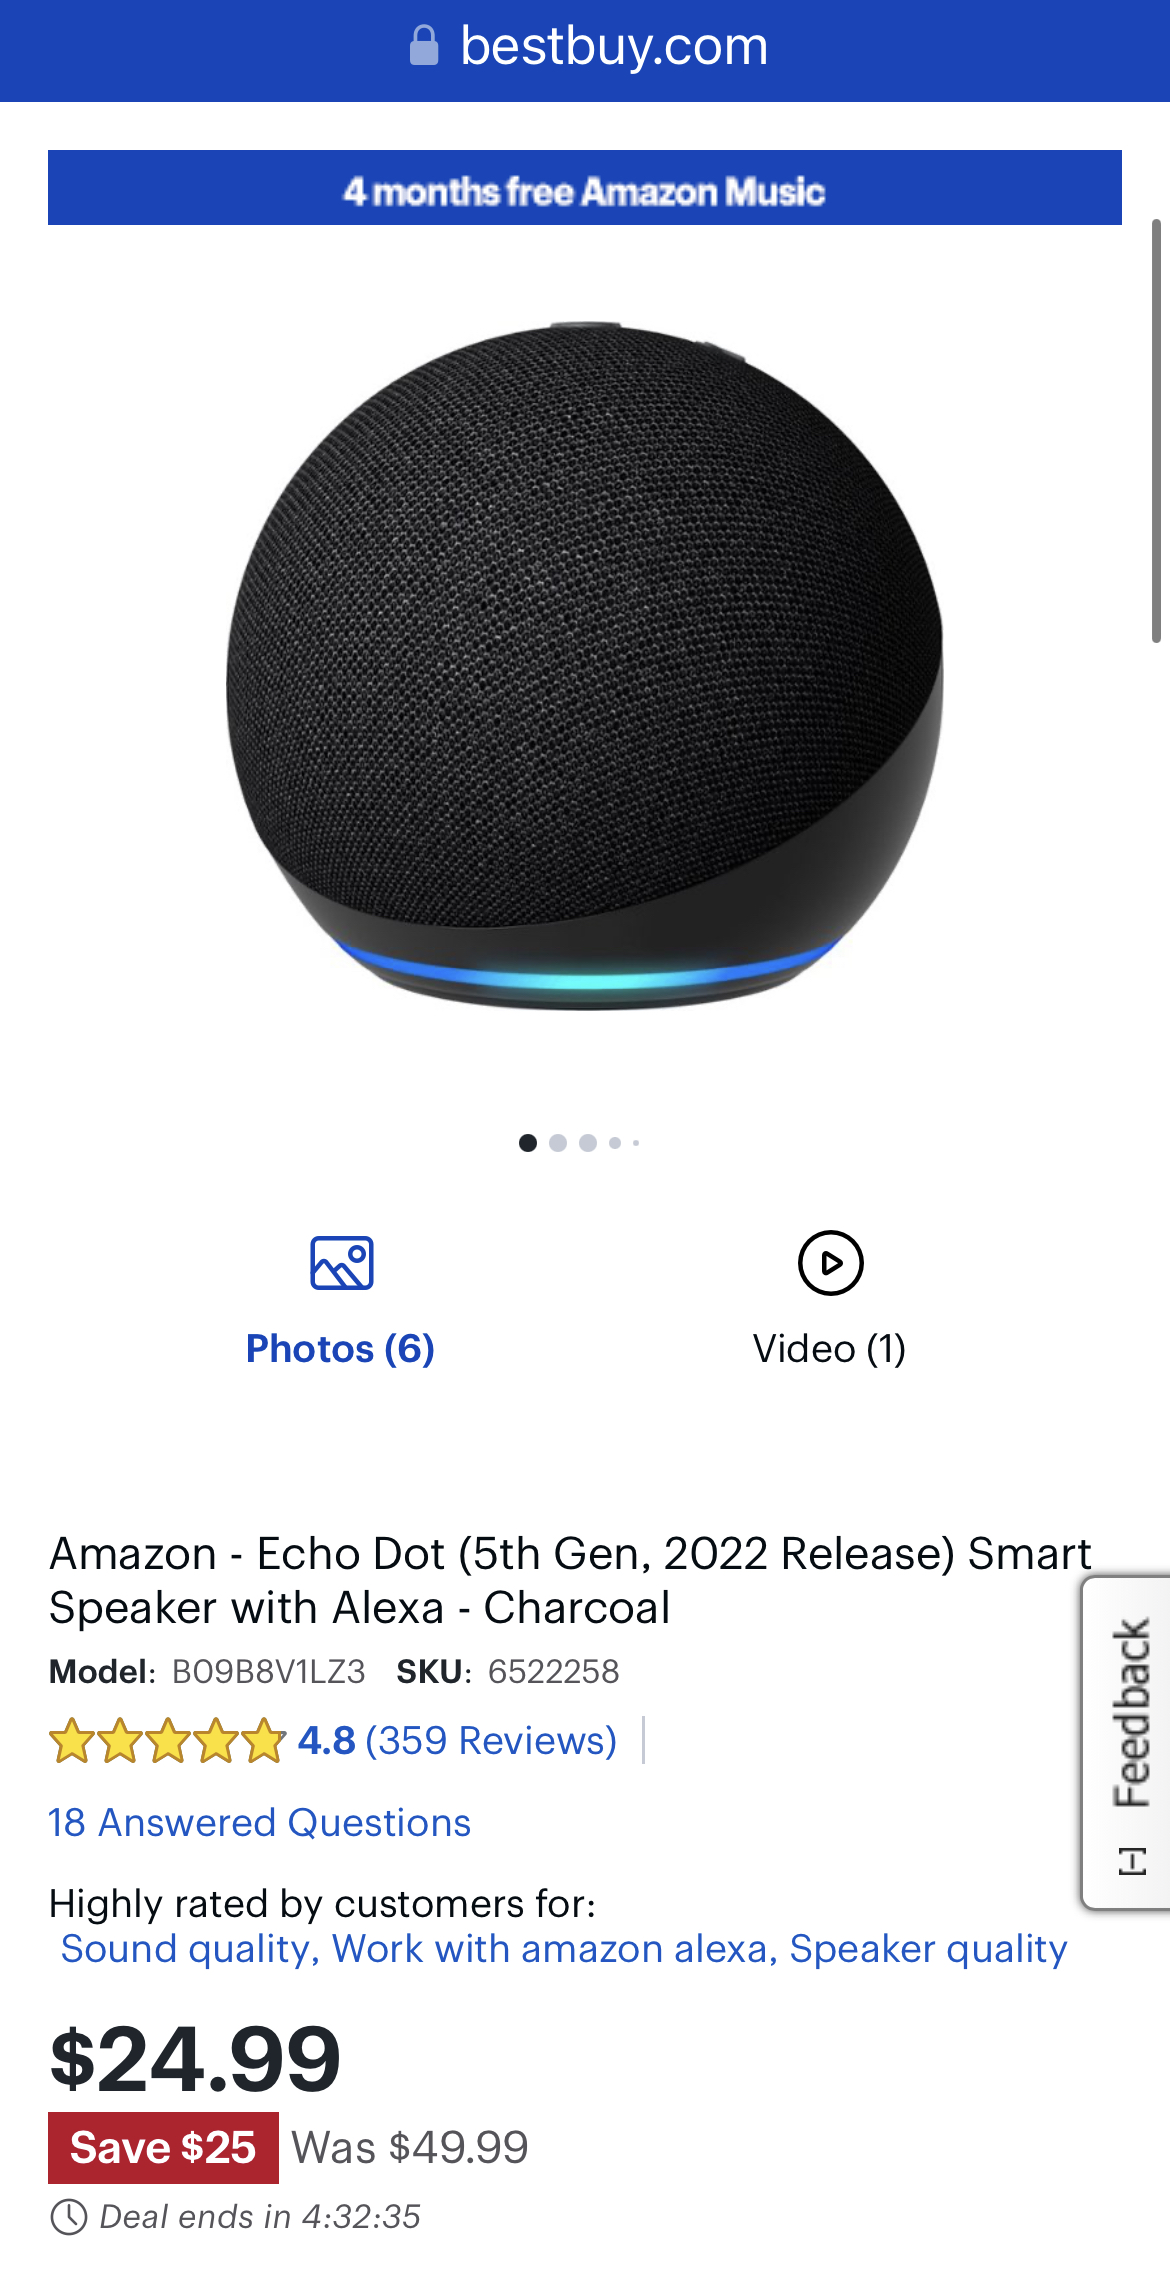 Amazon Echo Dot Smart Speaker Charcoal (5th Gen, 2022 Release)  With free 4 months Amazon Music. $24.99